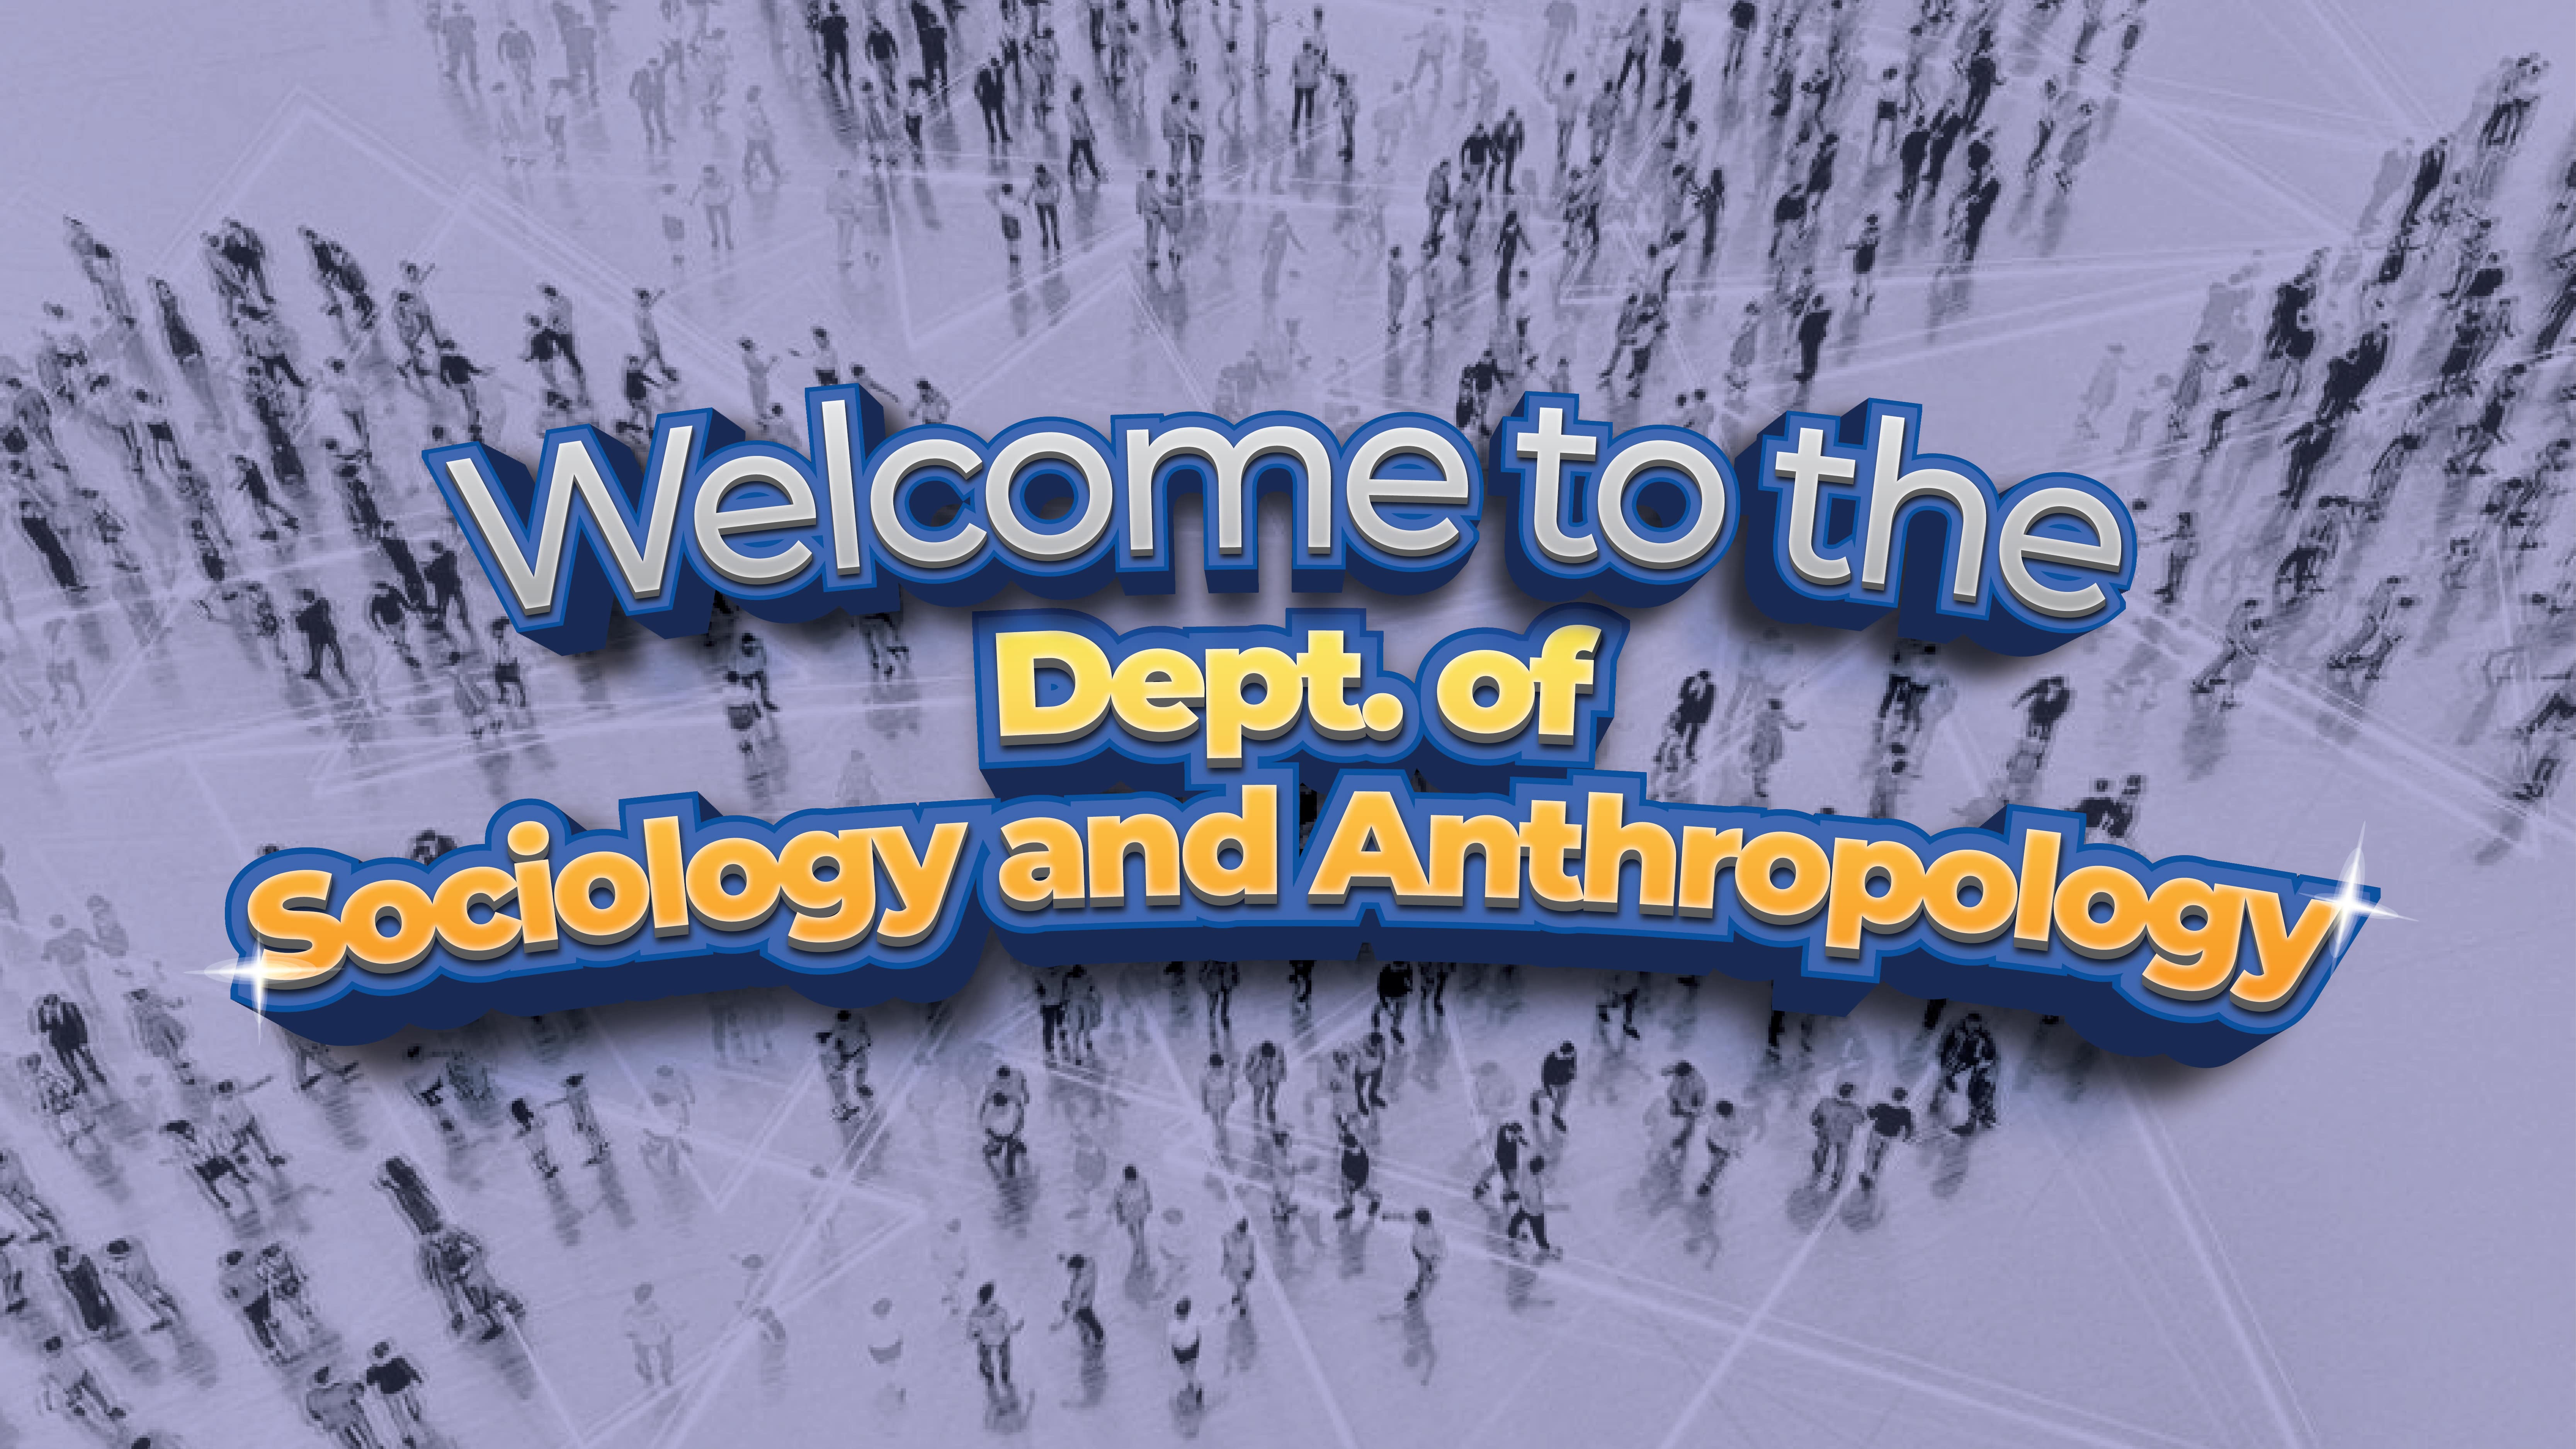 Sociology and Anthropology banner